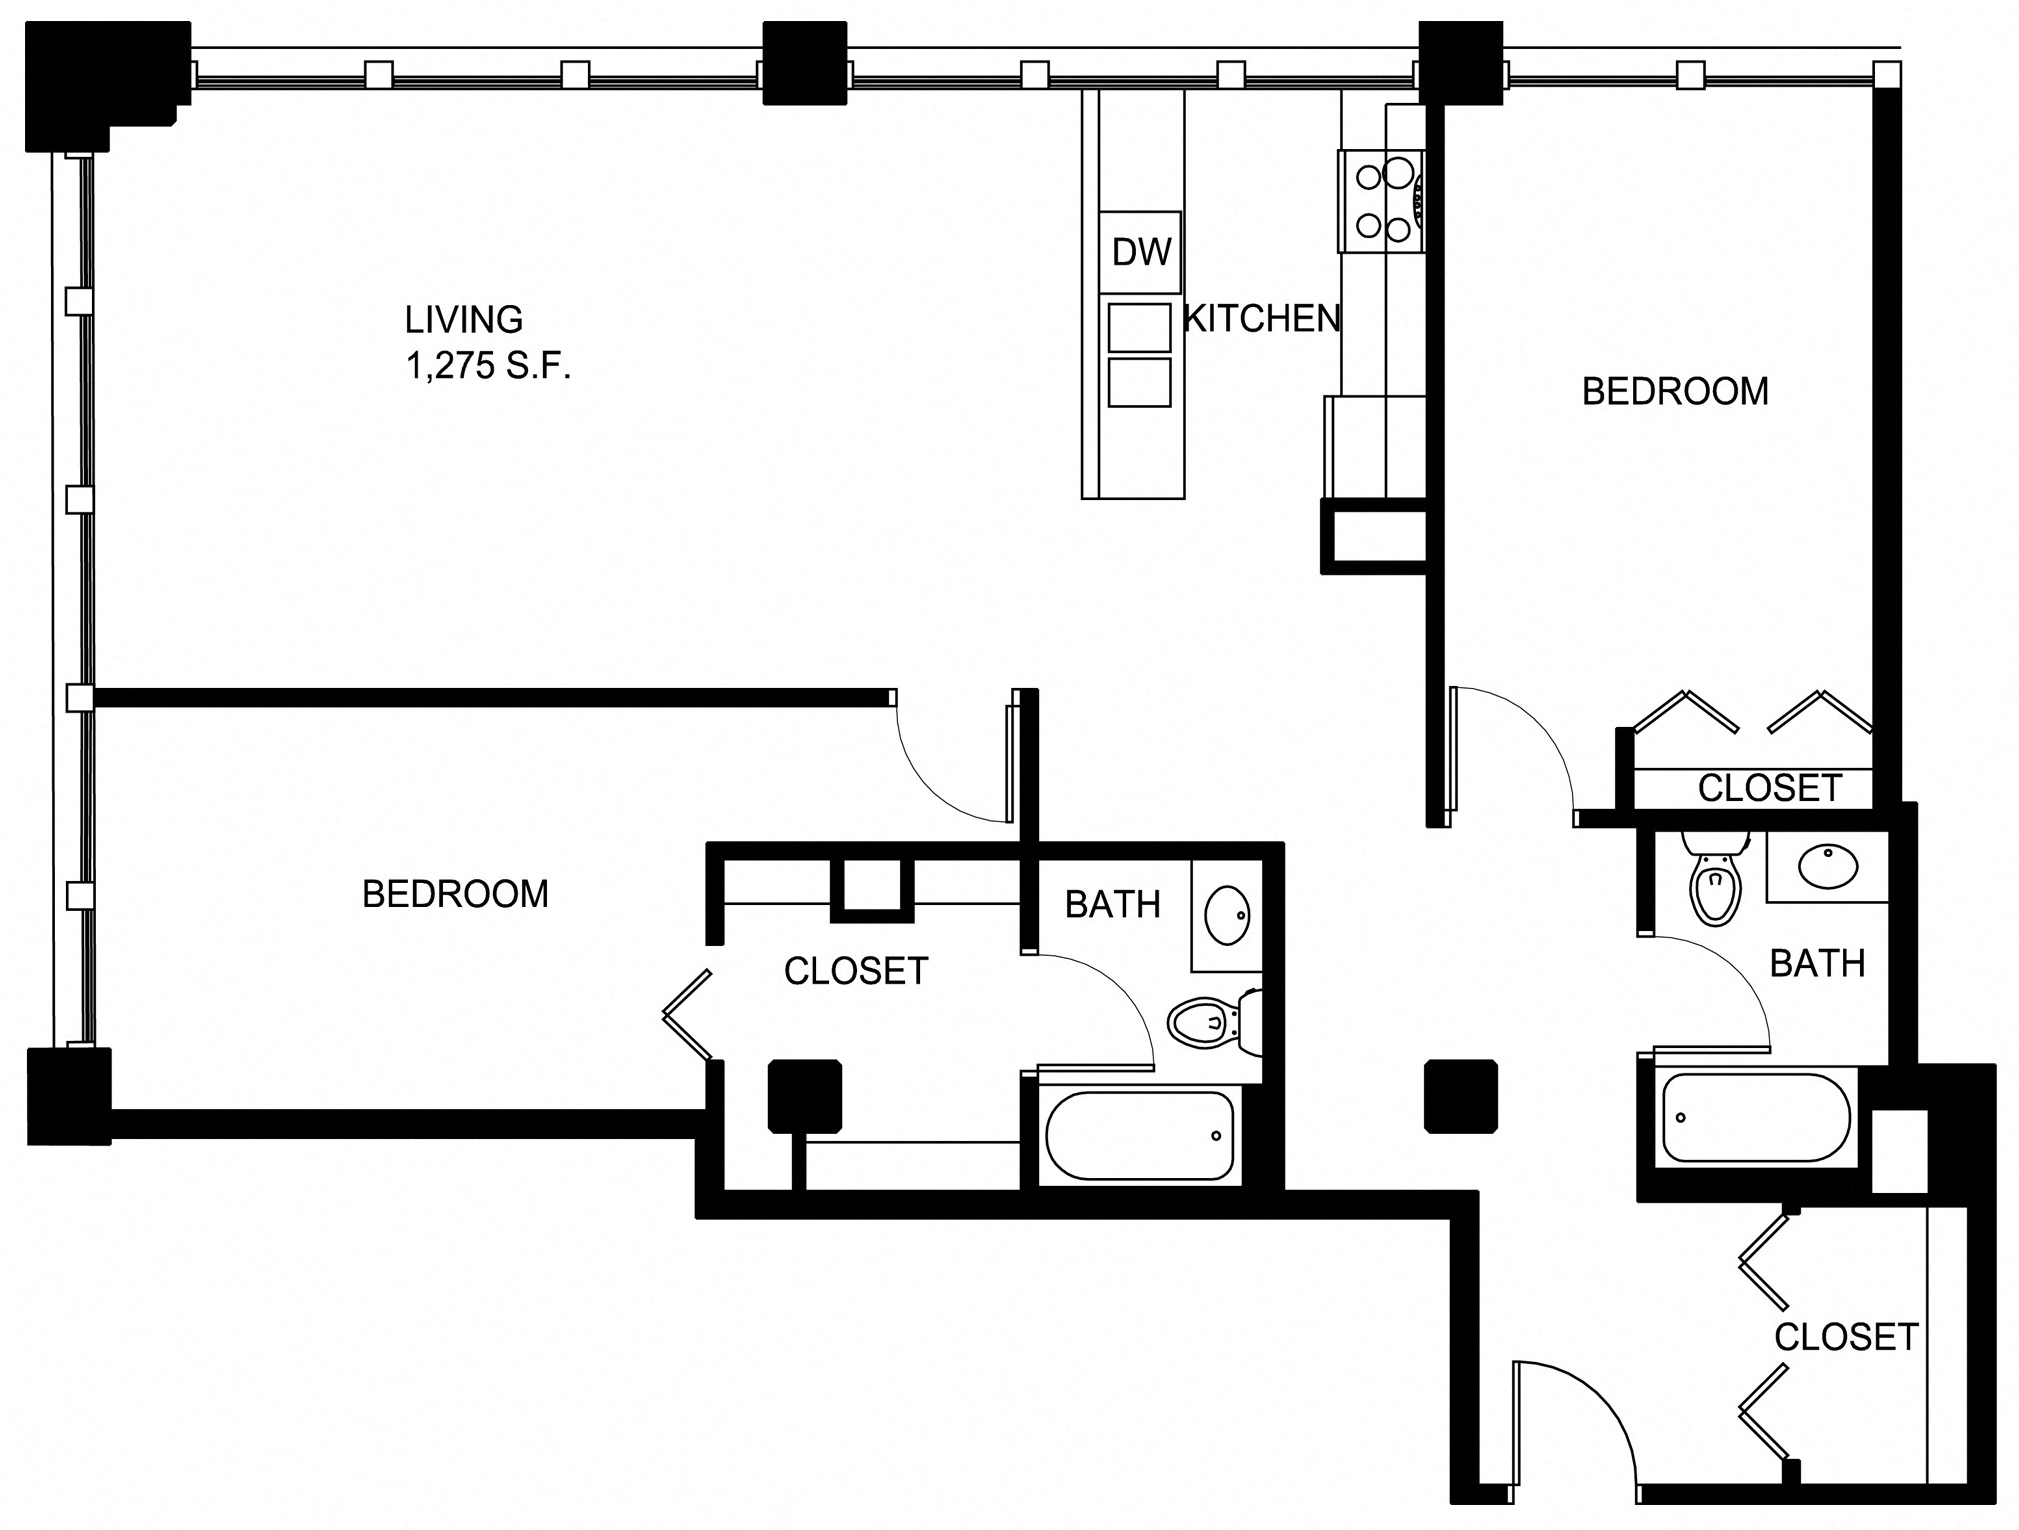 Floorplan for Apartment #P331, 2 bedroom unit at Halstead Providence